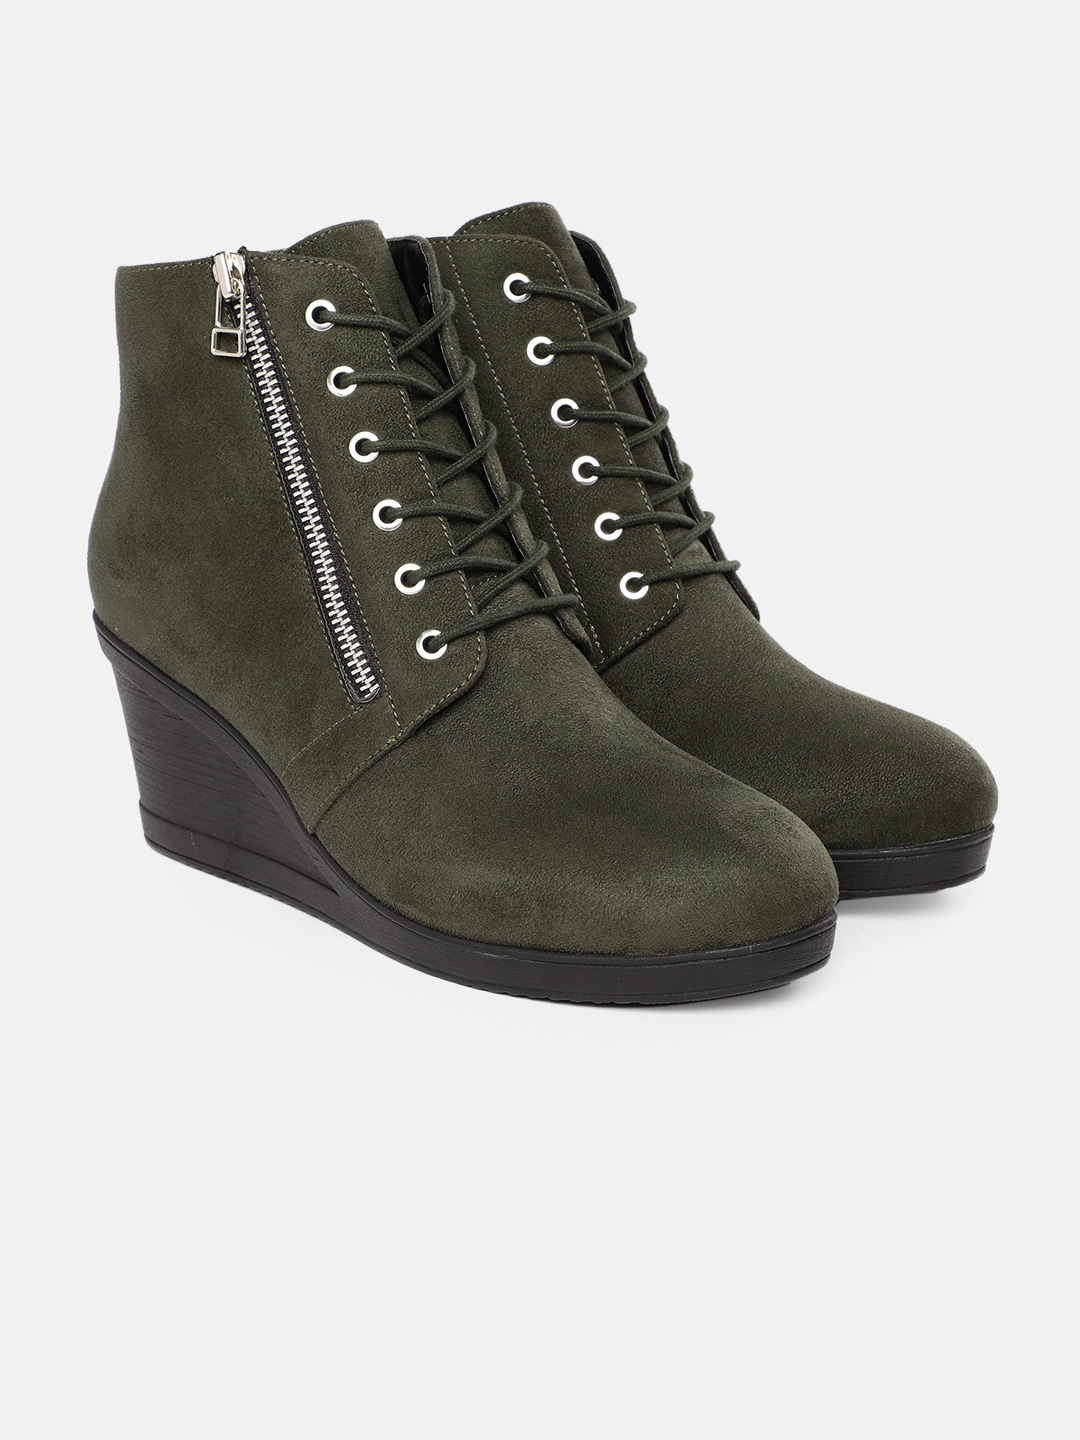 Roadster Olive Green Solid Suede Finish Mid-Top Wedge Heeled Boots Price in India